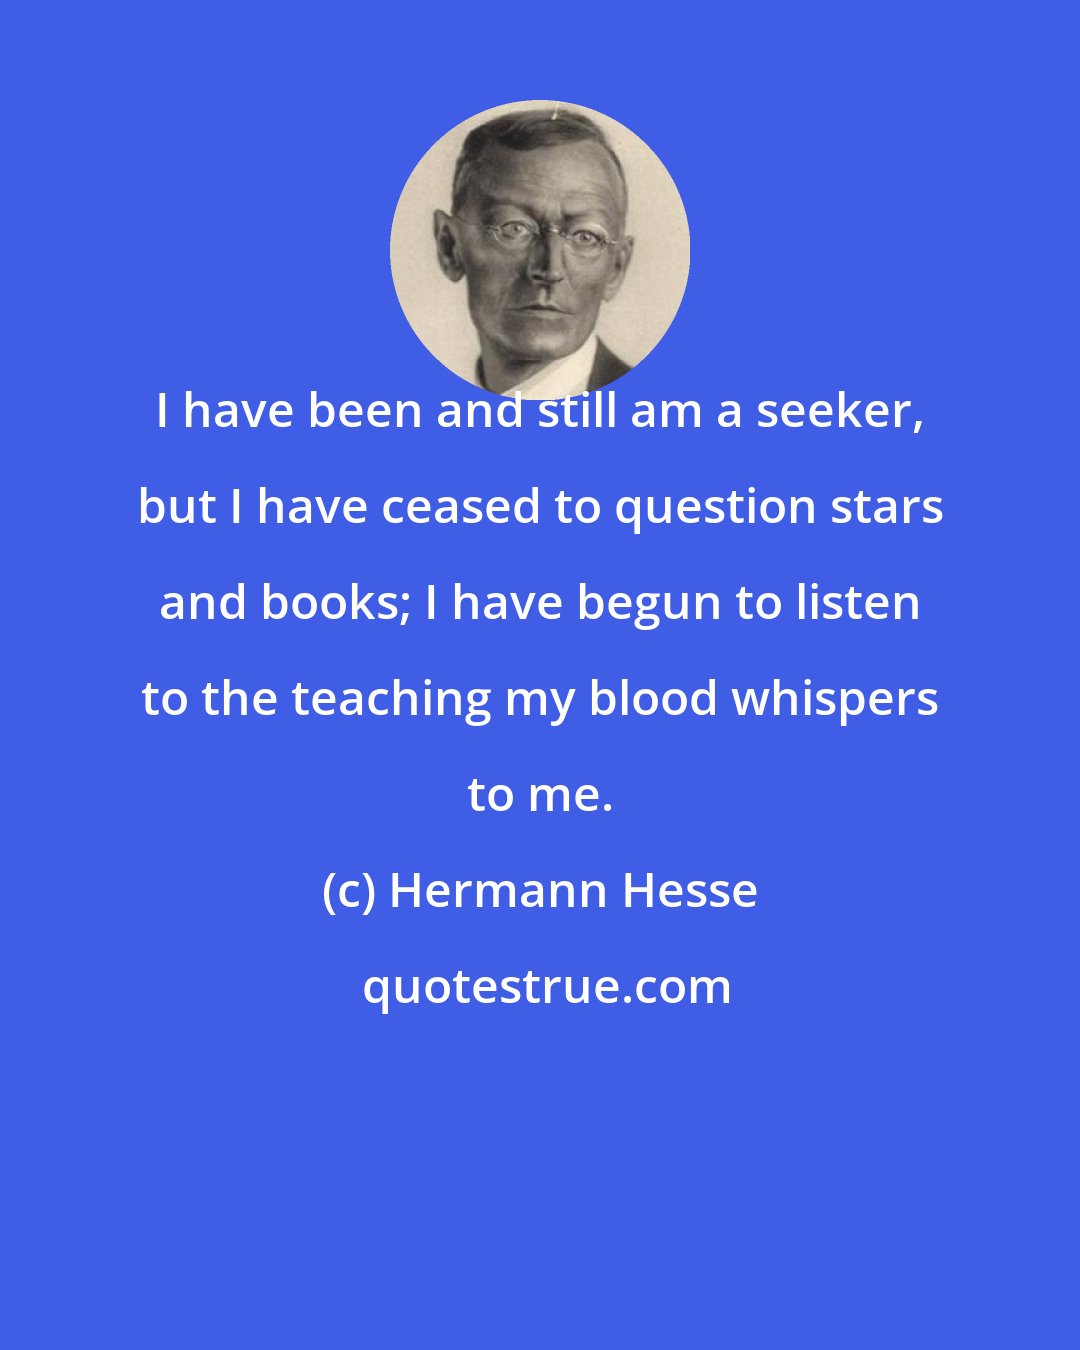 Hermann Hesse: I have been and still am a seeker, but I have ceased to question stars and books; I have begun to listen to the teaching my blood whispers to me.